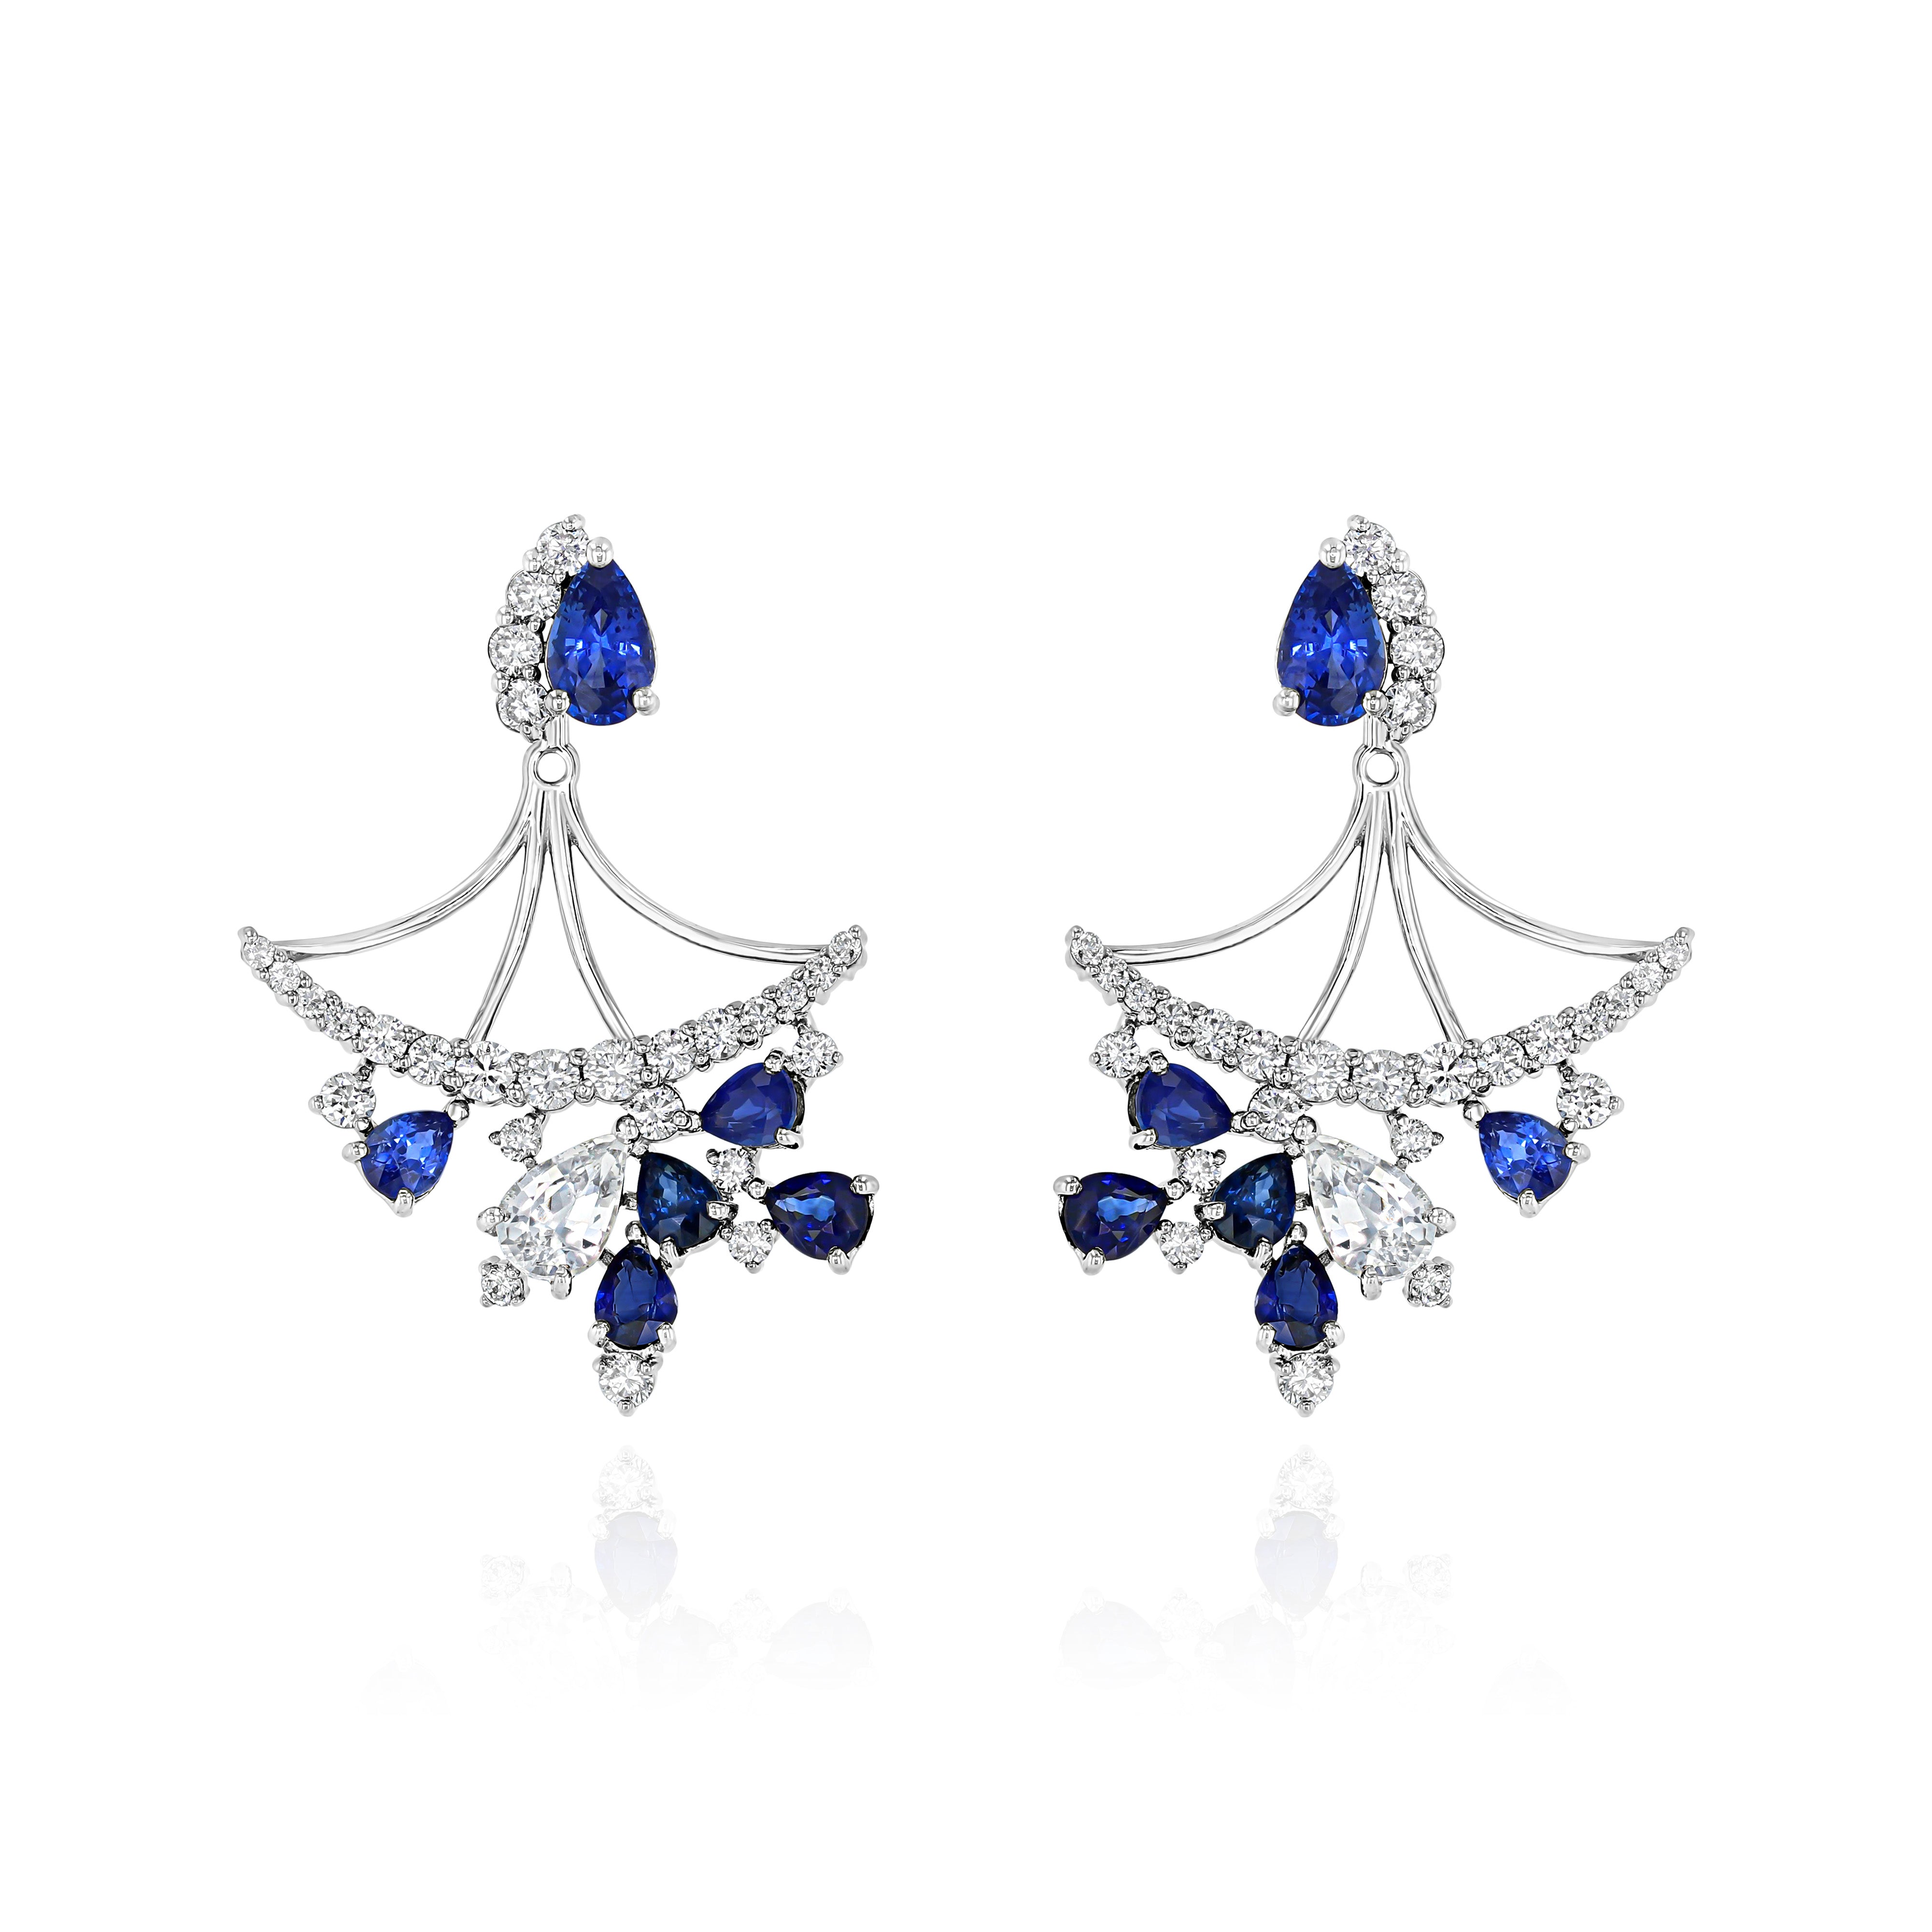 White Gold Earrings with Blue and White Sapphires, and Diamonds, Large